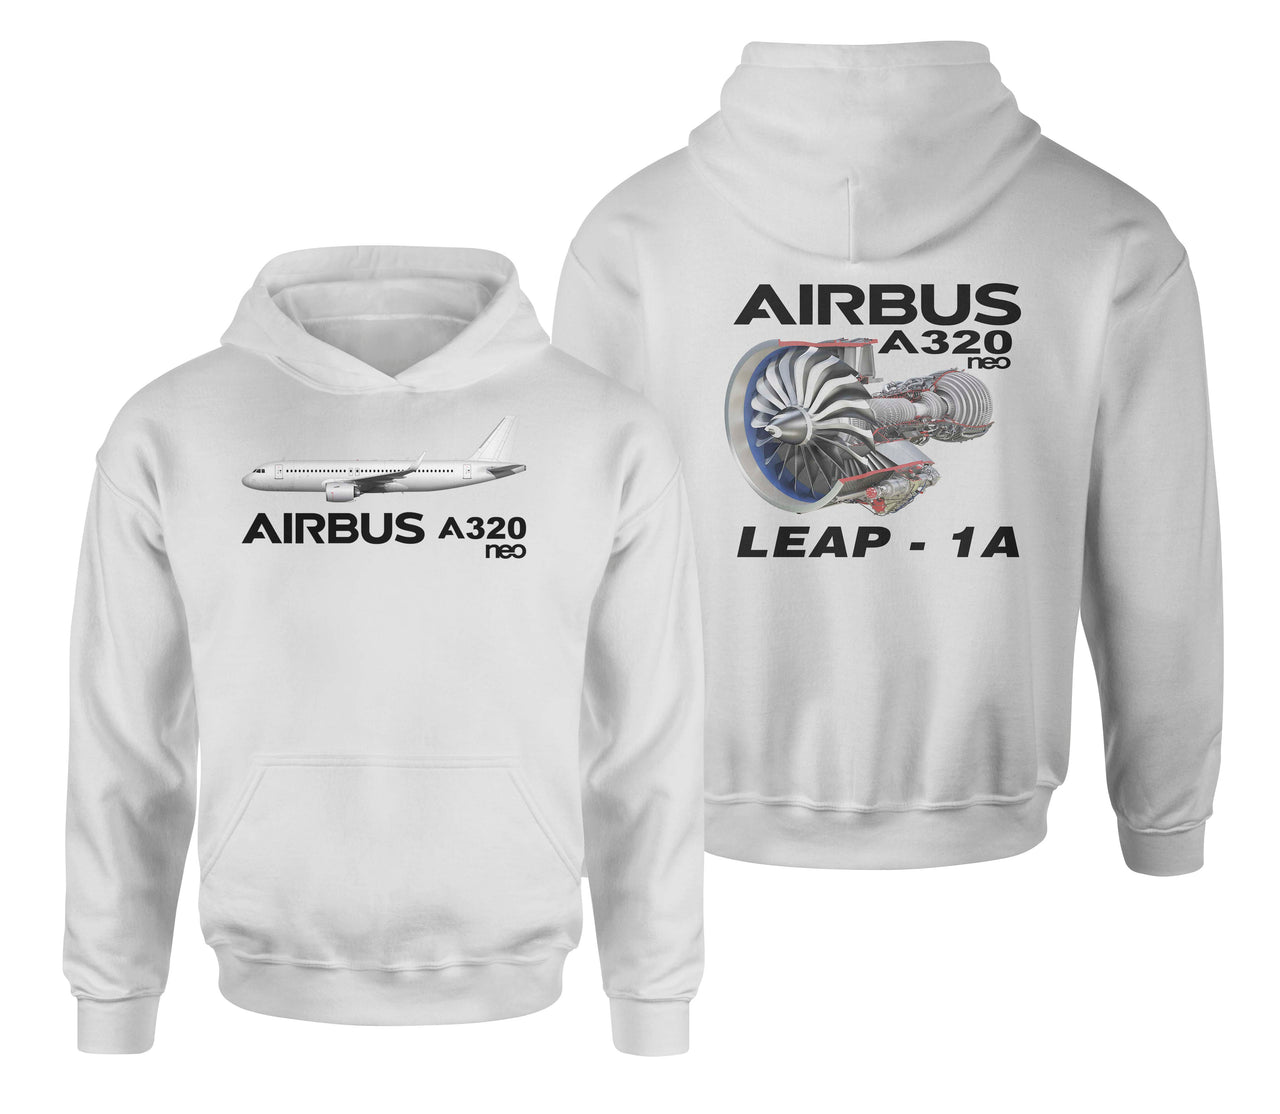 Airbus A320neo & Leap 1A Designed Double Side Hoodies